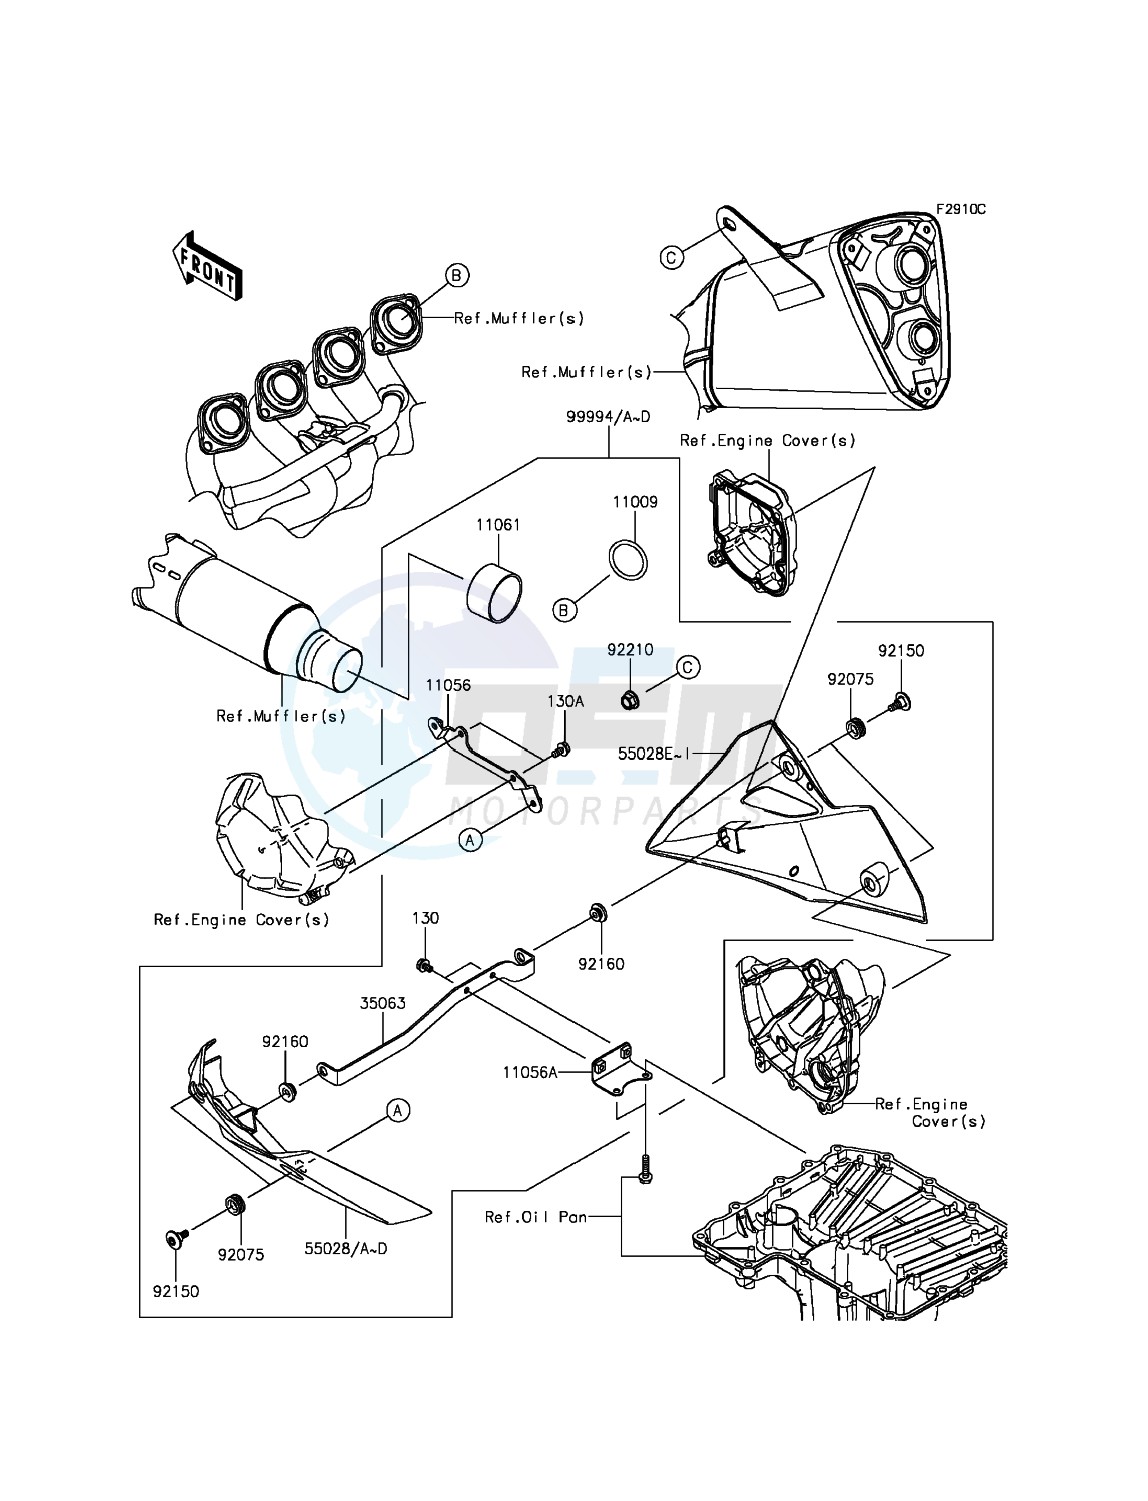 Accessory(Belly Pan) blueprint